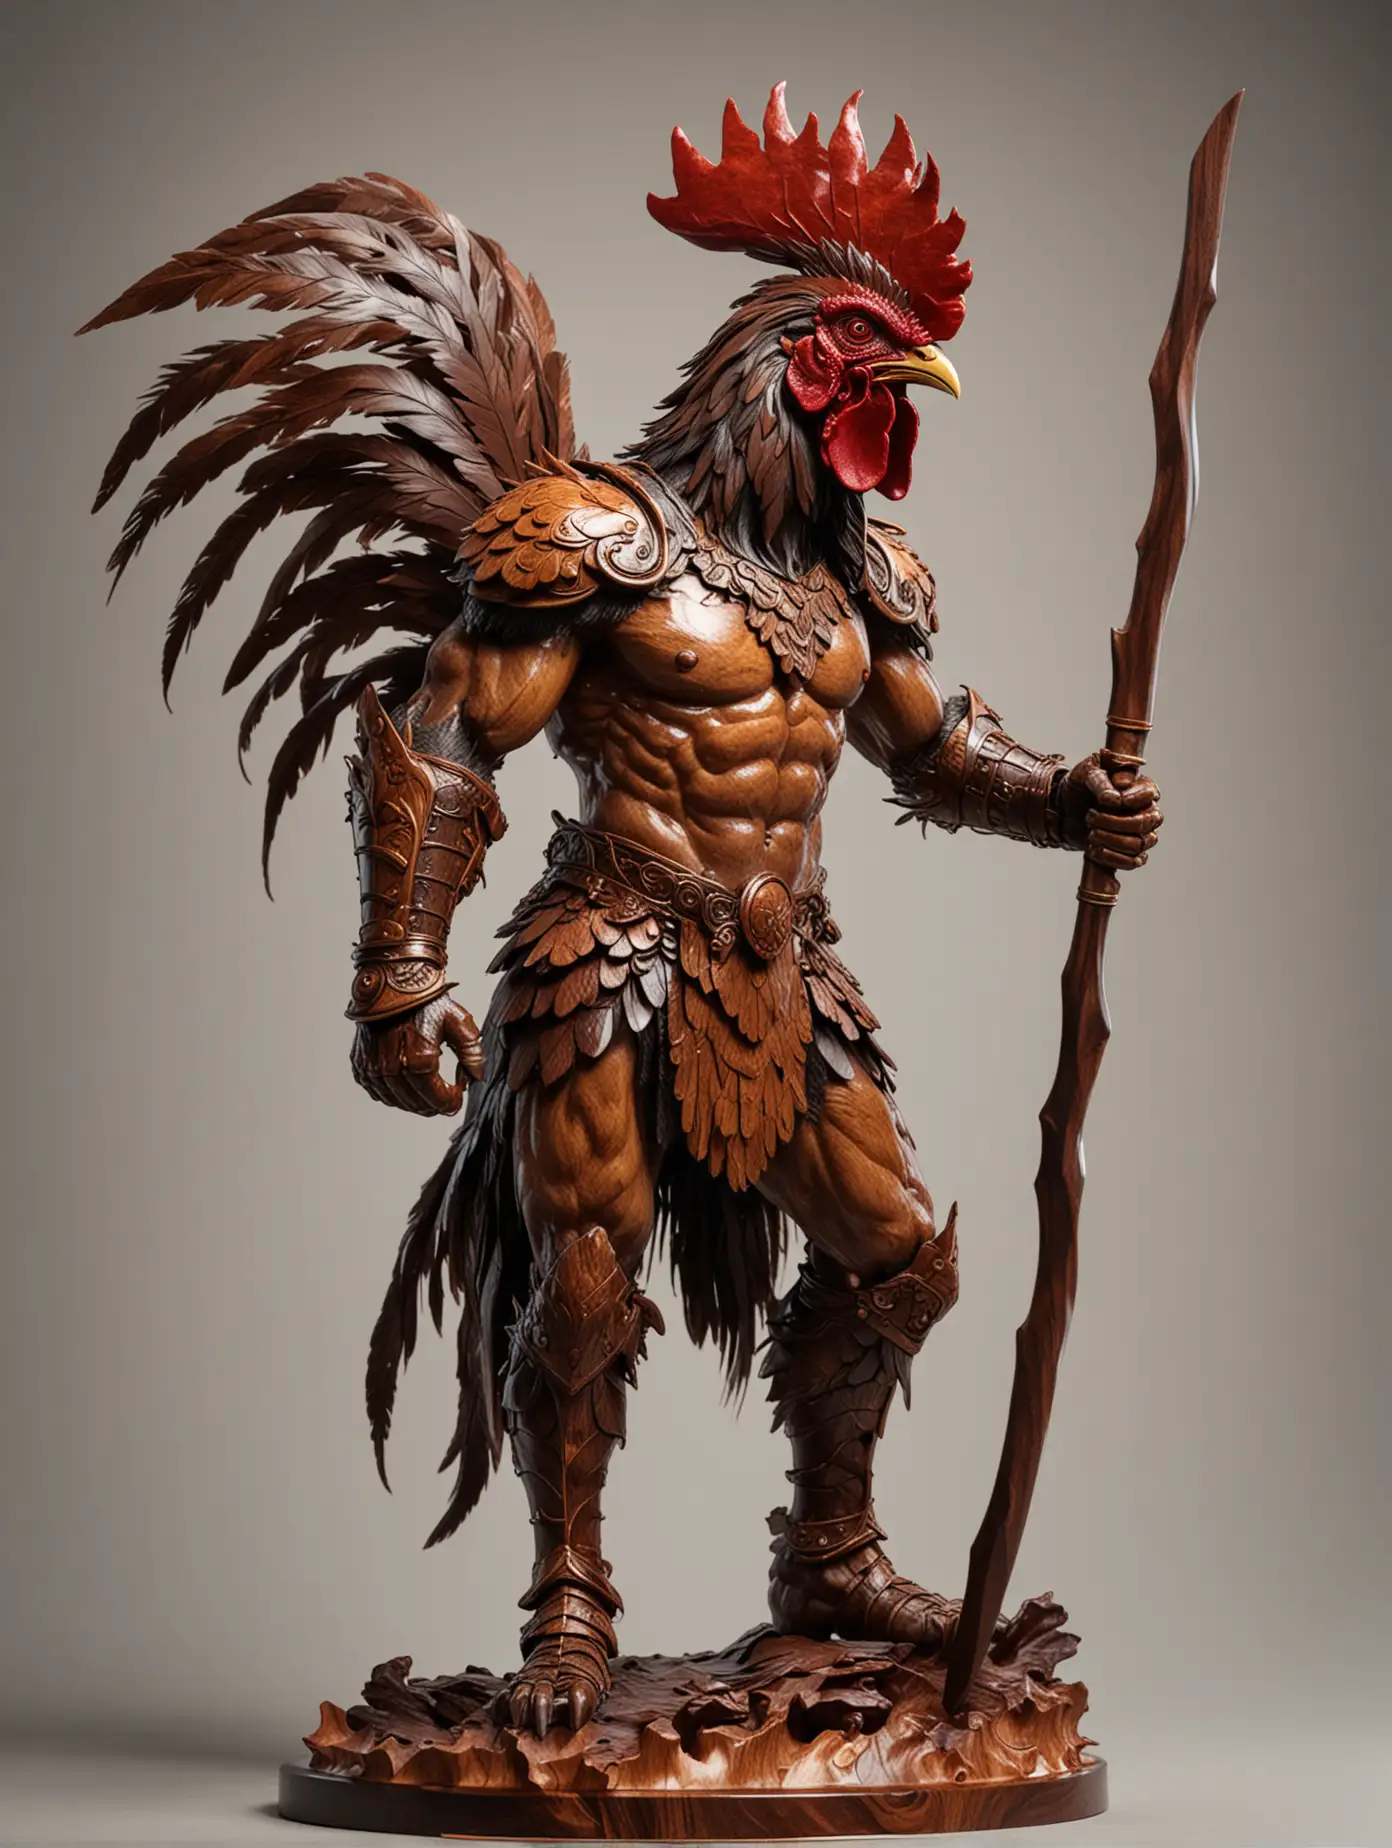 Rooster-Warrior-Sculpture-Lacquered-Walnut-Burl-and-Mahogany-Art-Piece